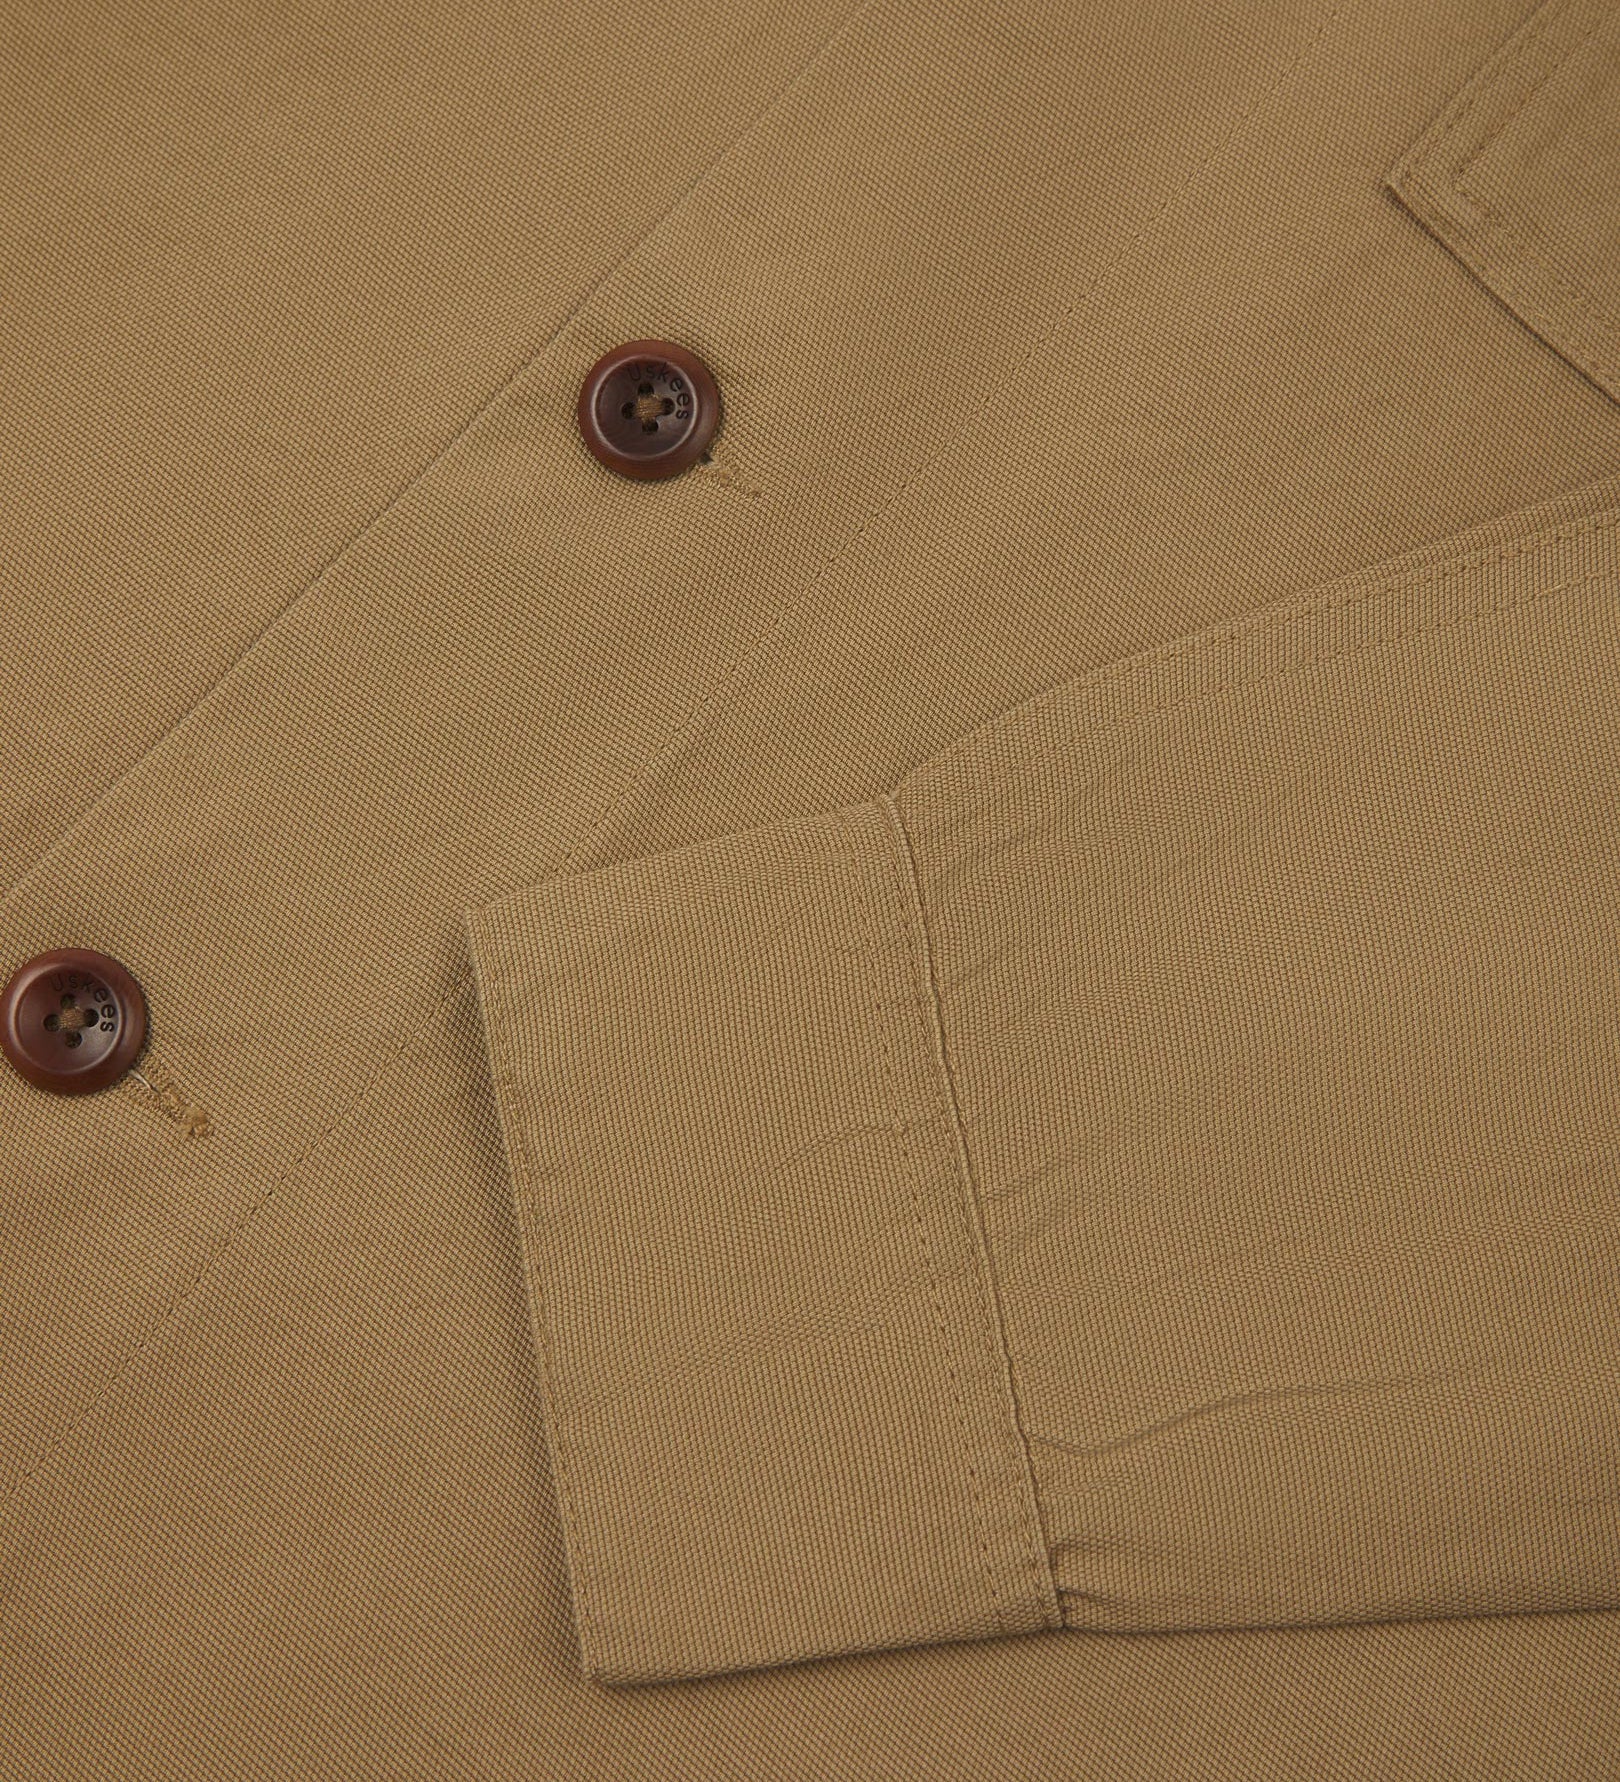 View of the mid-section and sleeve of the 3003 Uskees button-down work shirt in khaki with focus on cuff, placket and corozo buttons.